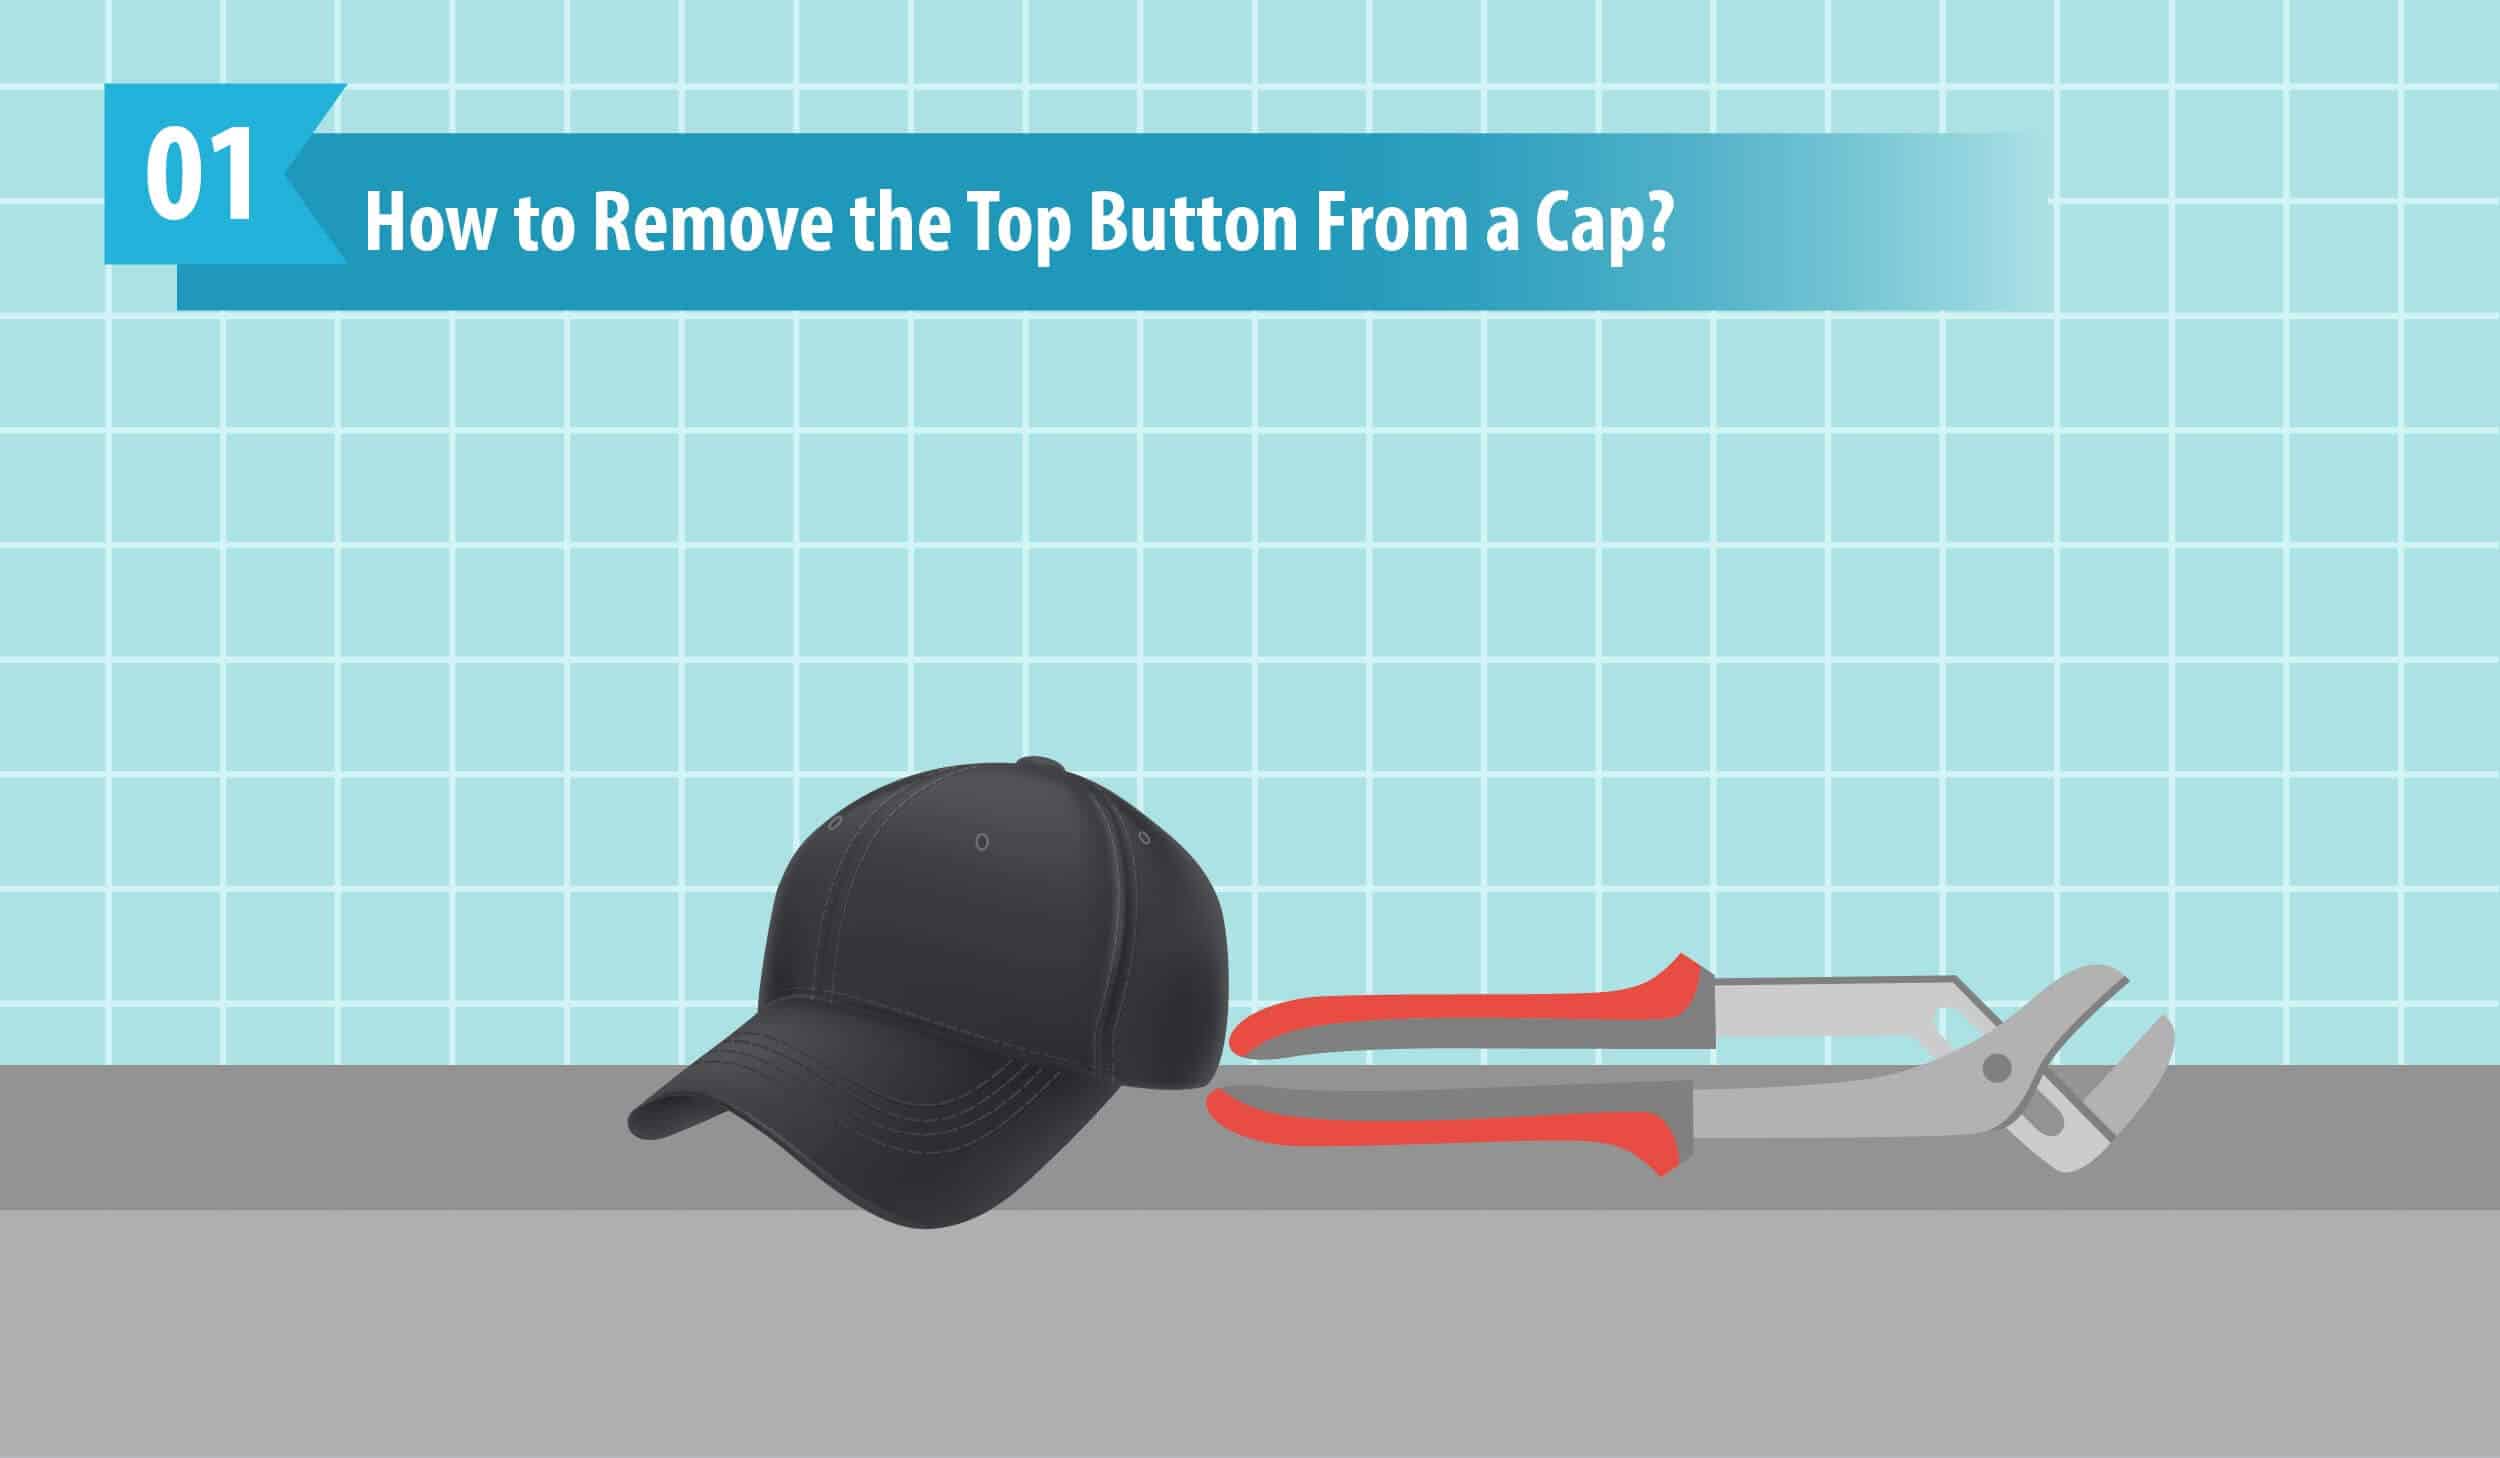 How to Remove the Top Button From a Cap